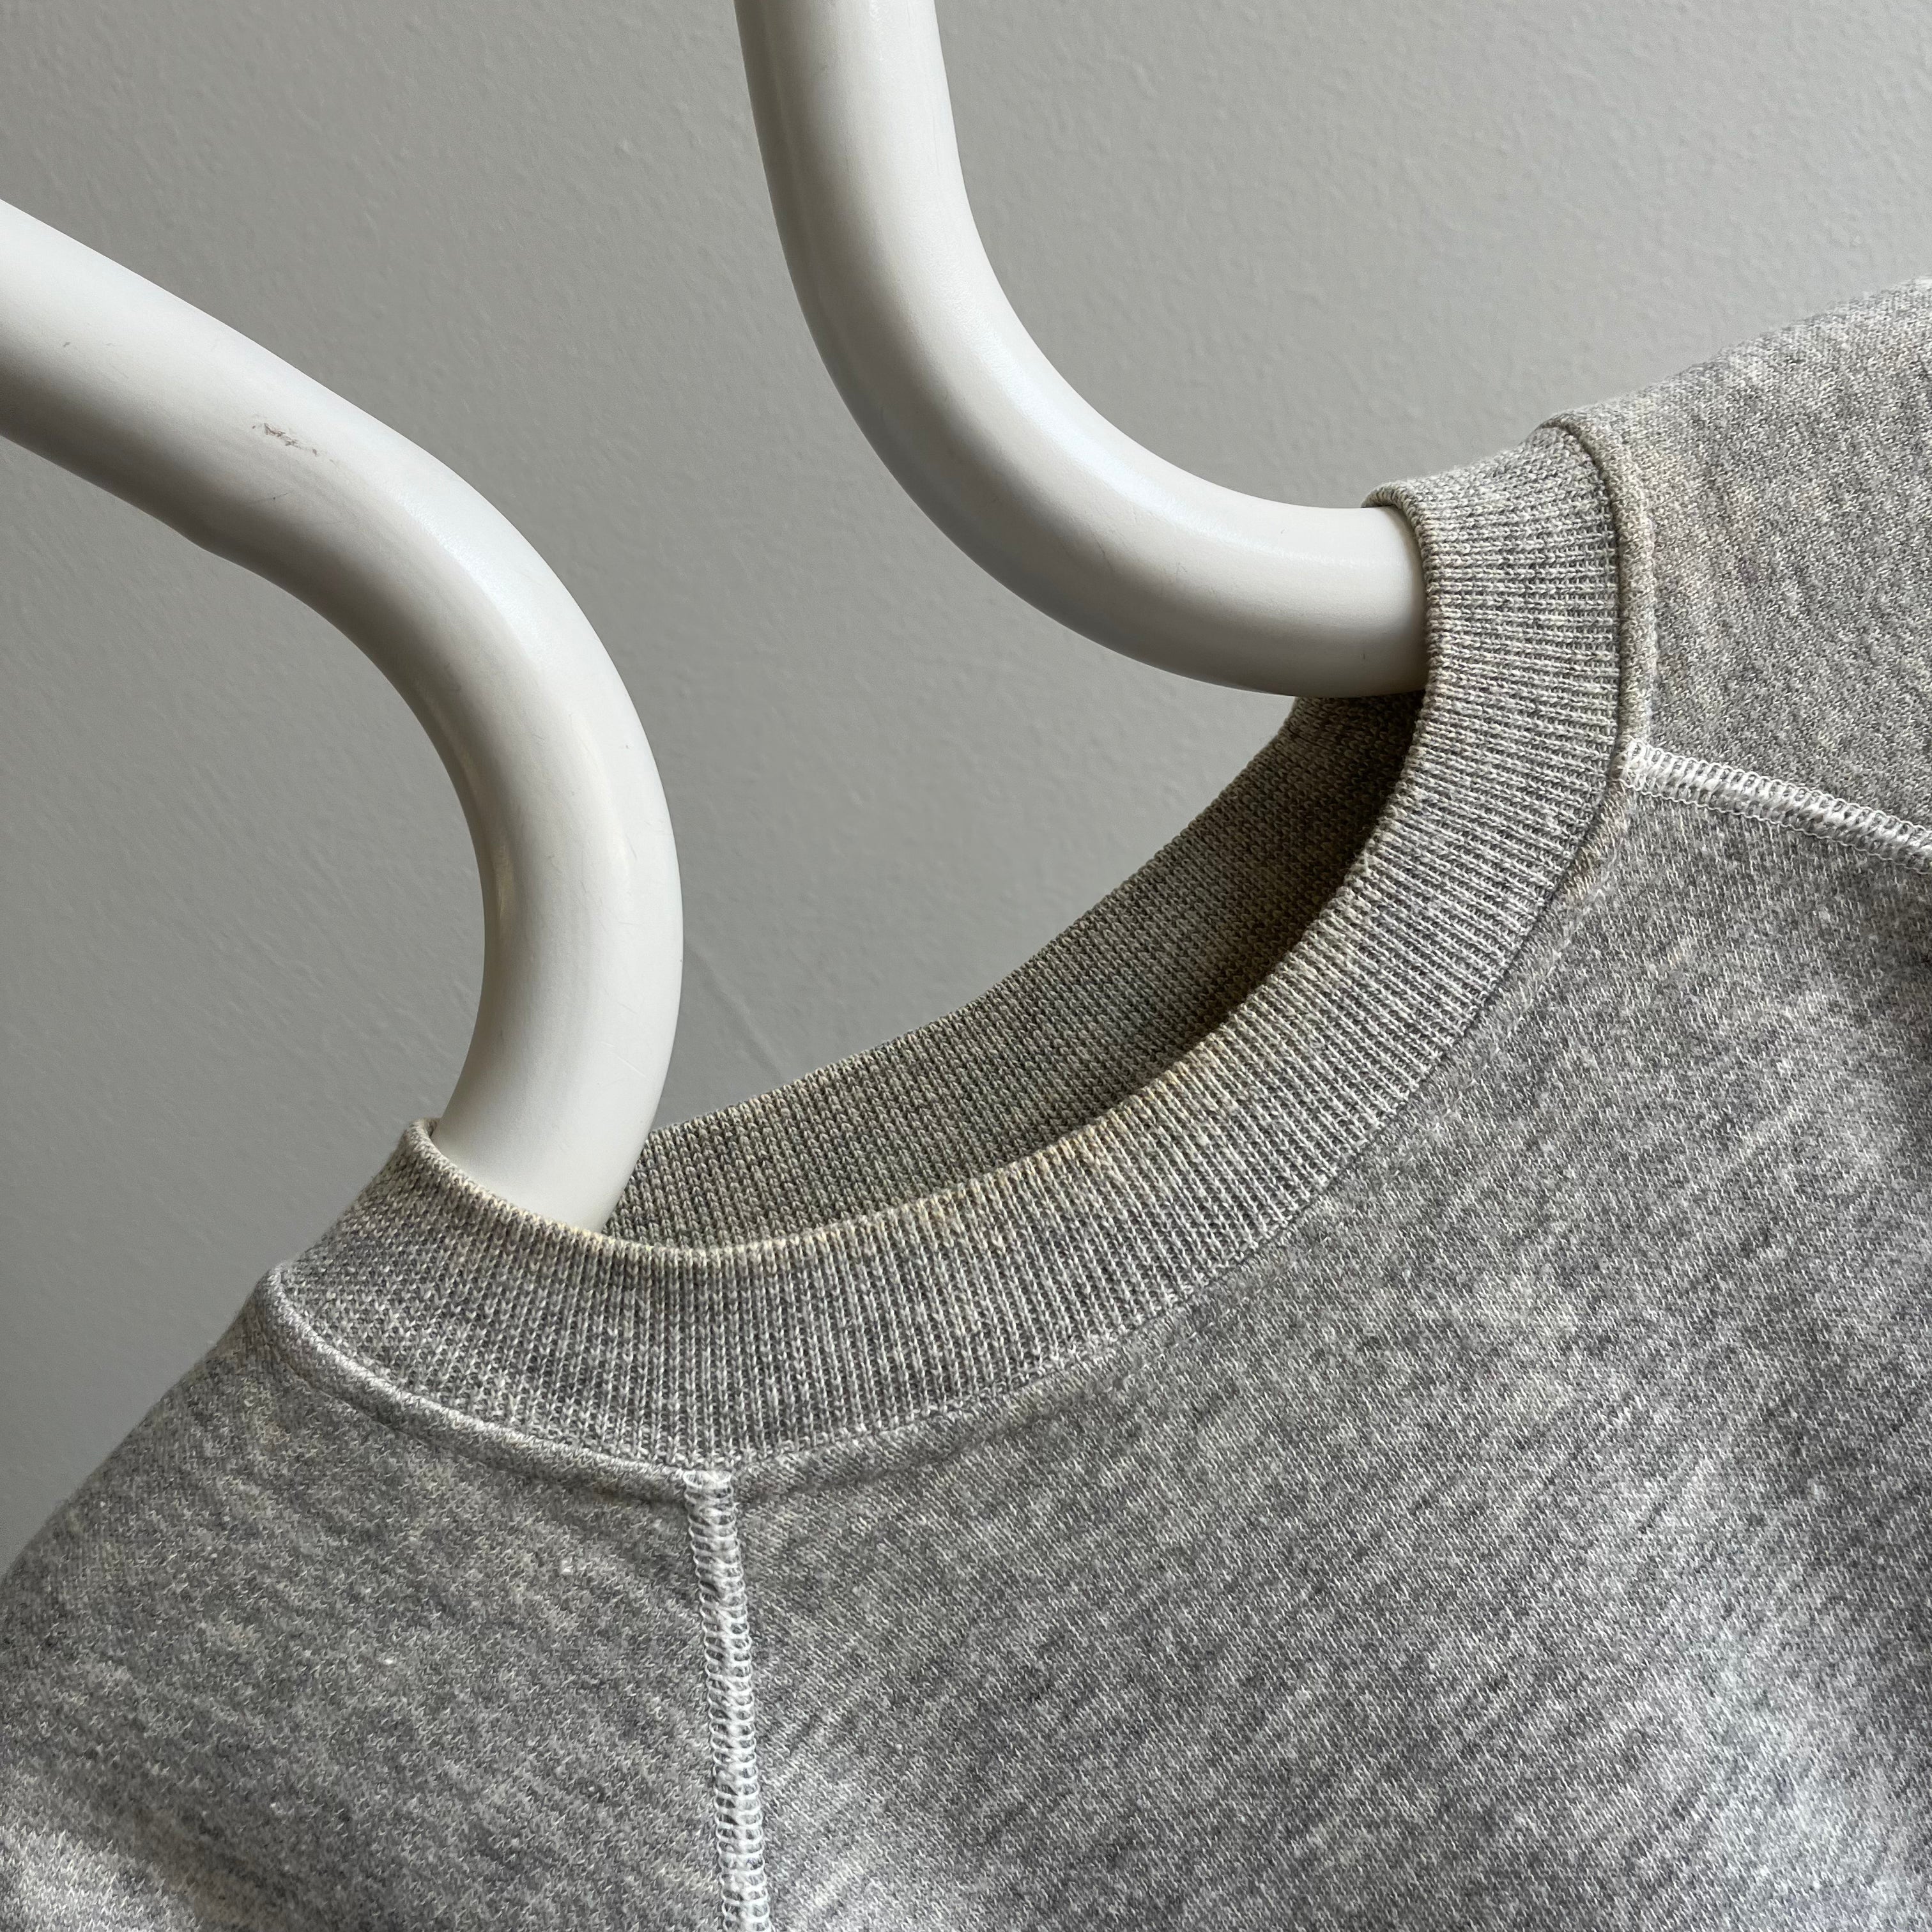 1980s Nicely Aged Blank Gray Raglan by Hanes